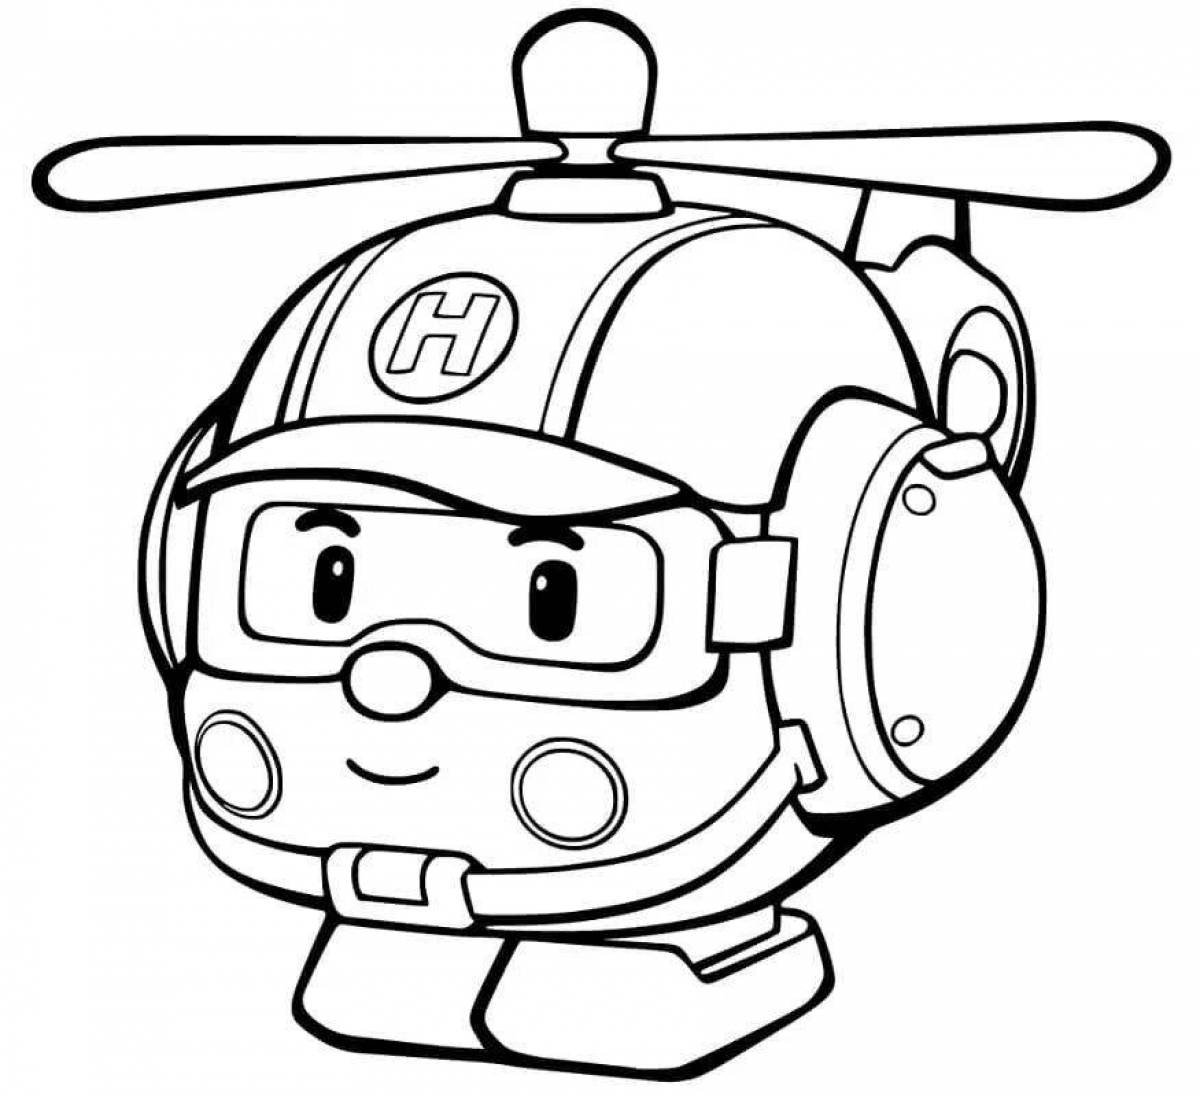 Robocar poli and his friends colorful coloring page